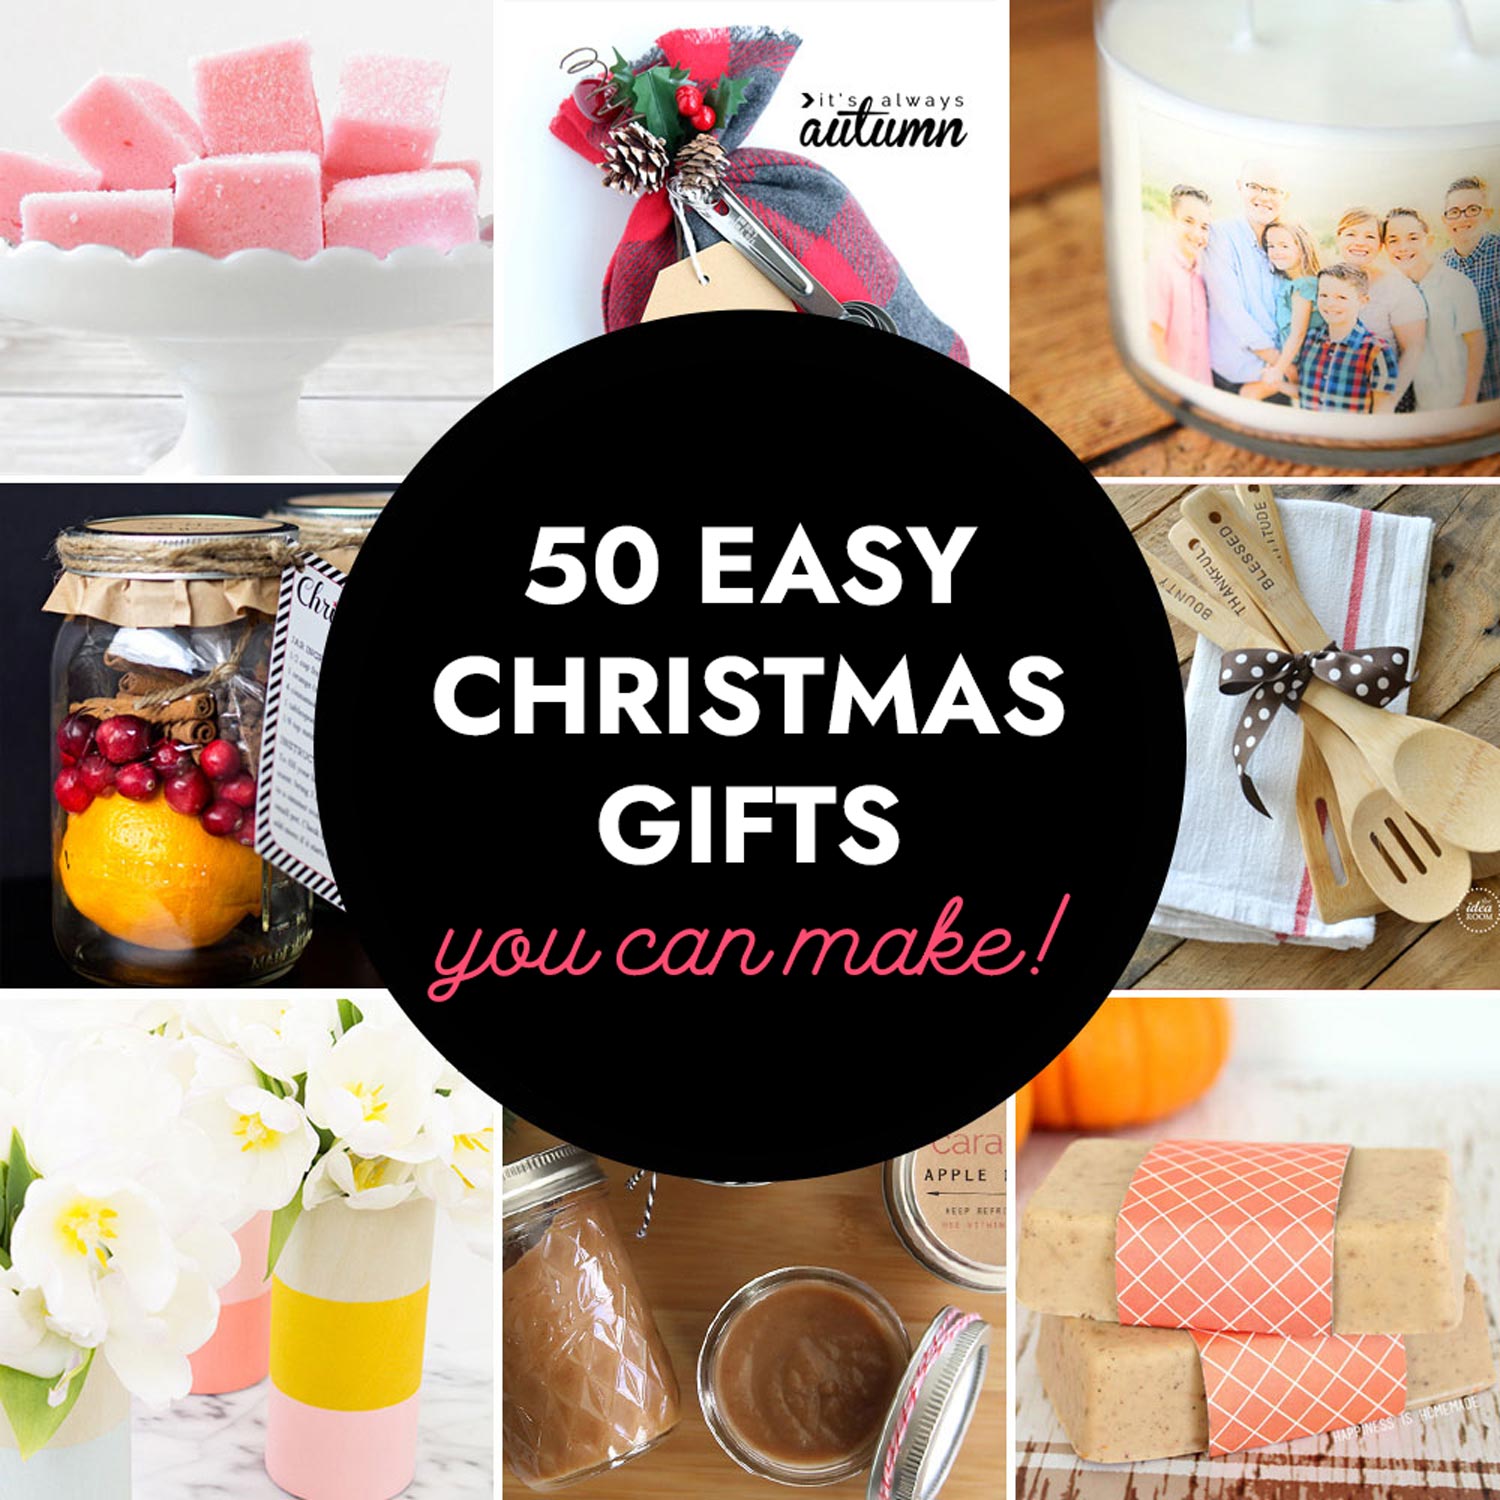 12 Homemade Christmas Gifts Ideas You Can Give in a Jar - Thermomix Recipes  - FAYI